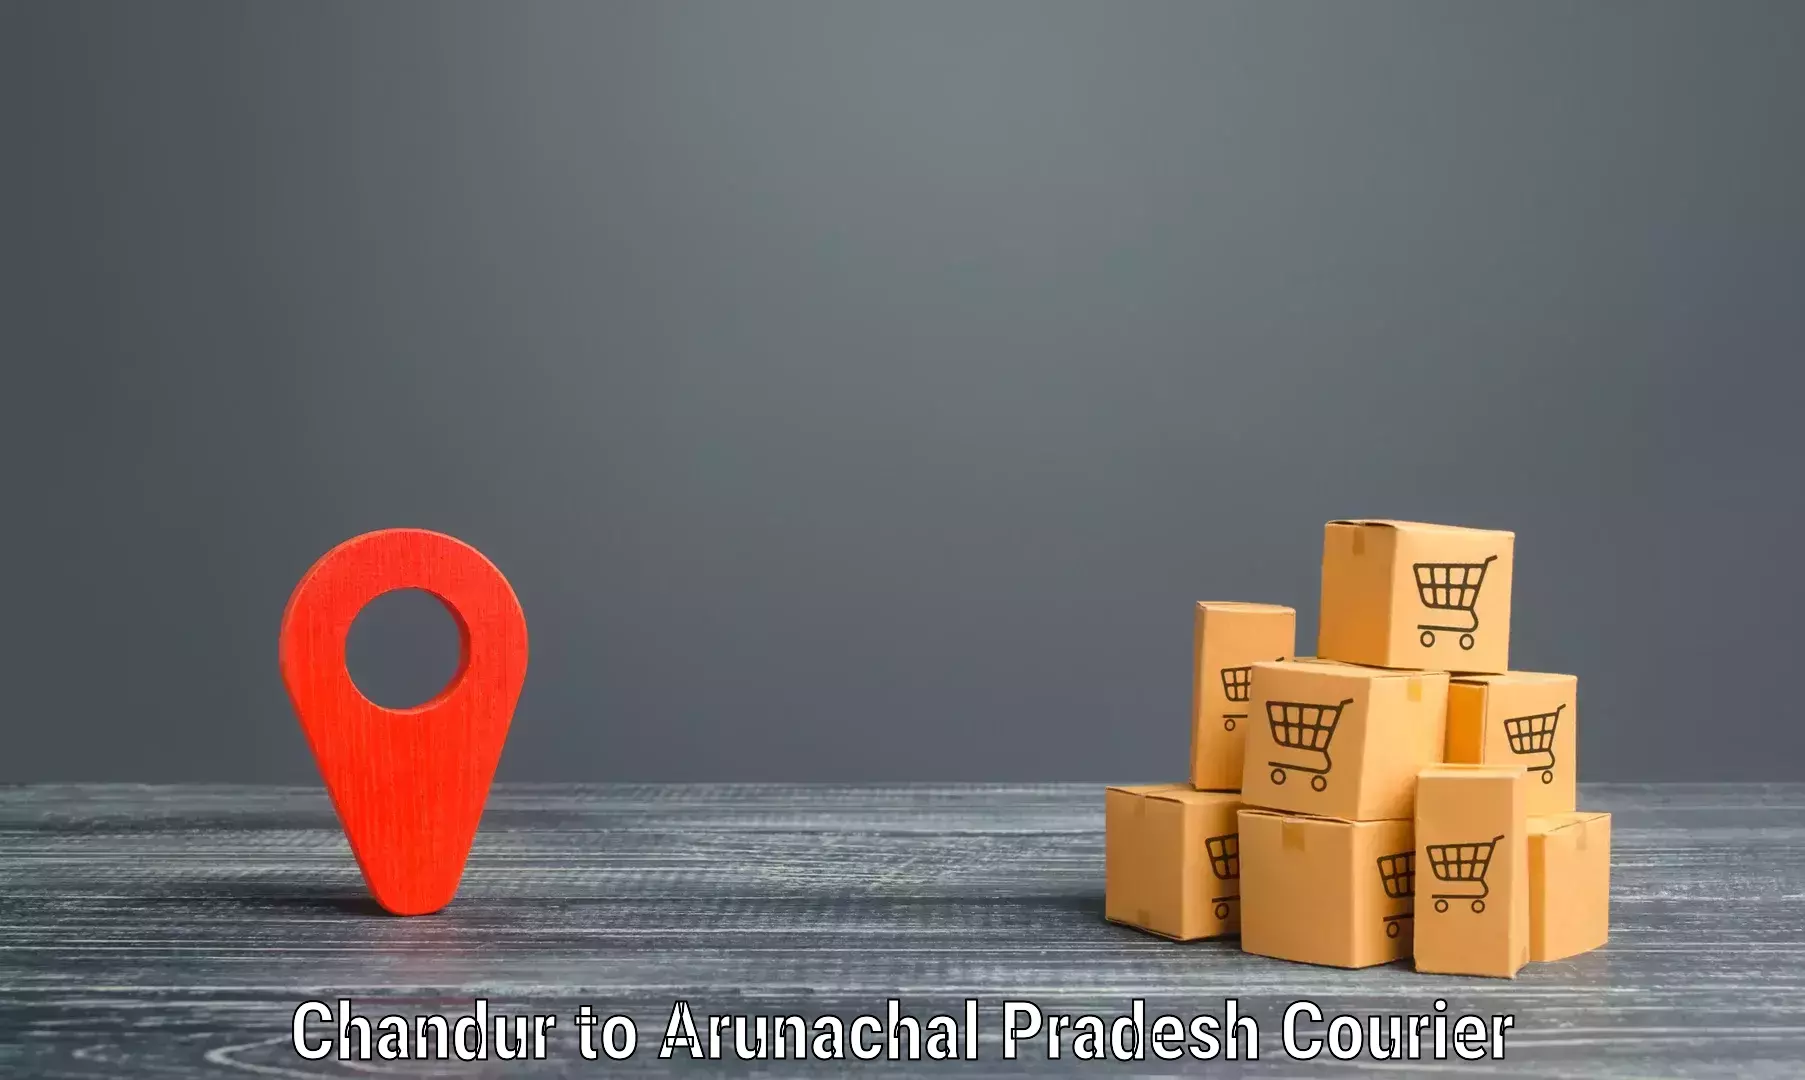 Courier service efficiency Chandur to Deomali